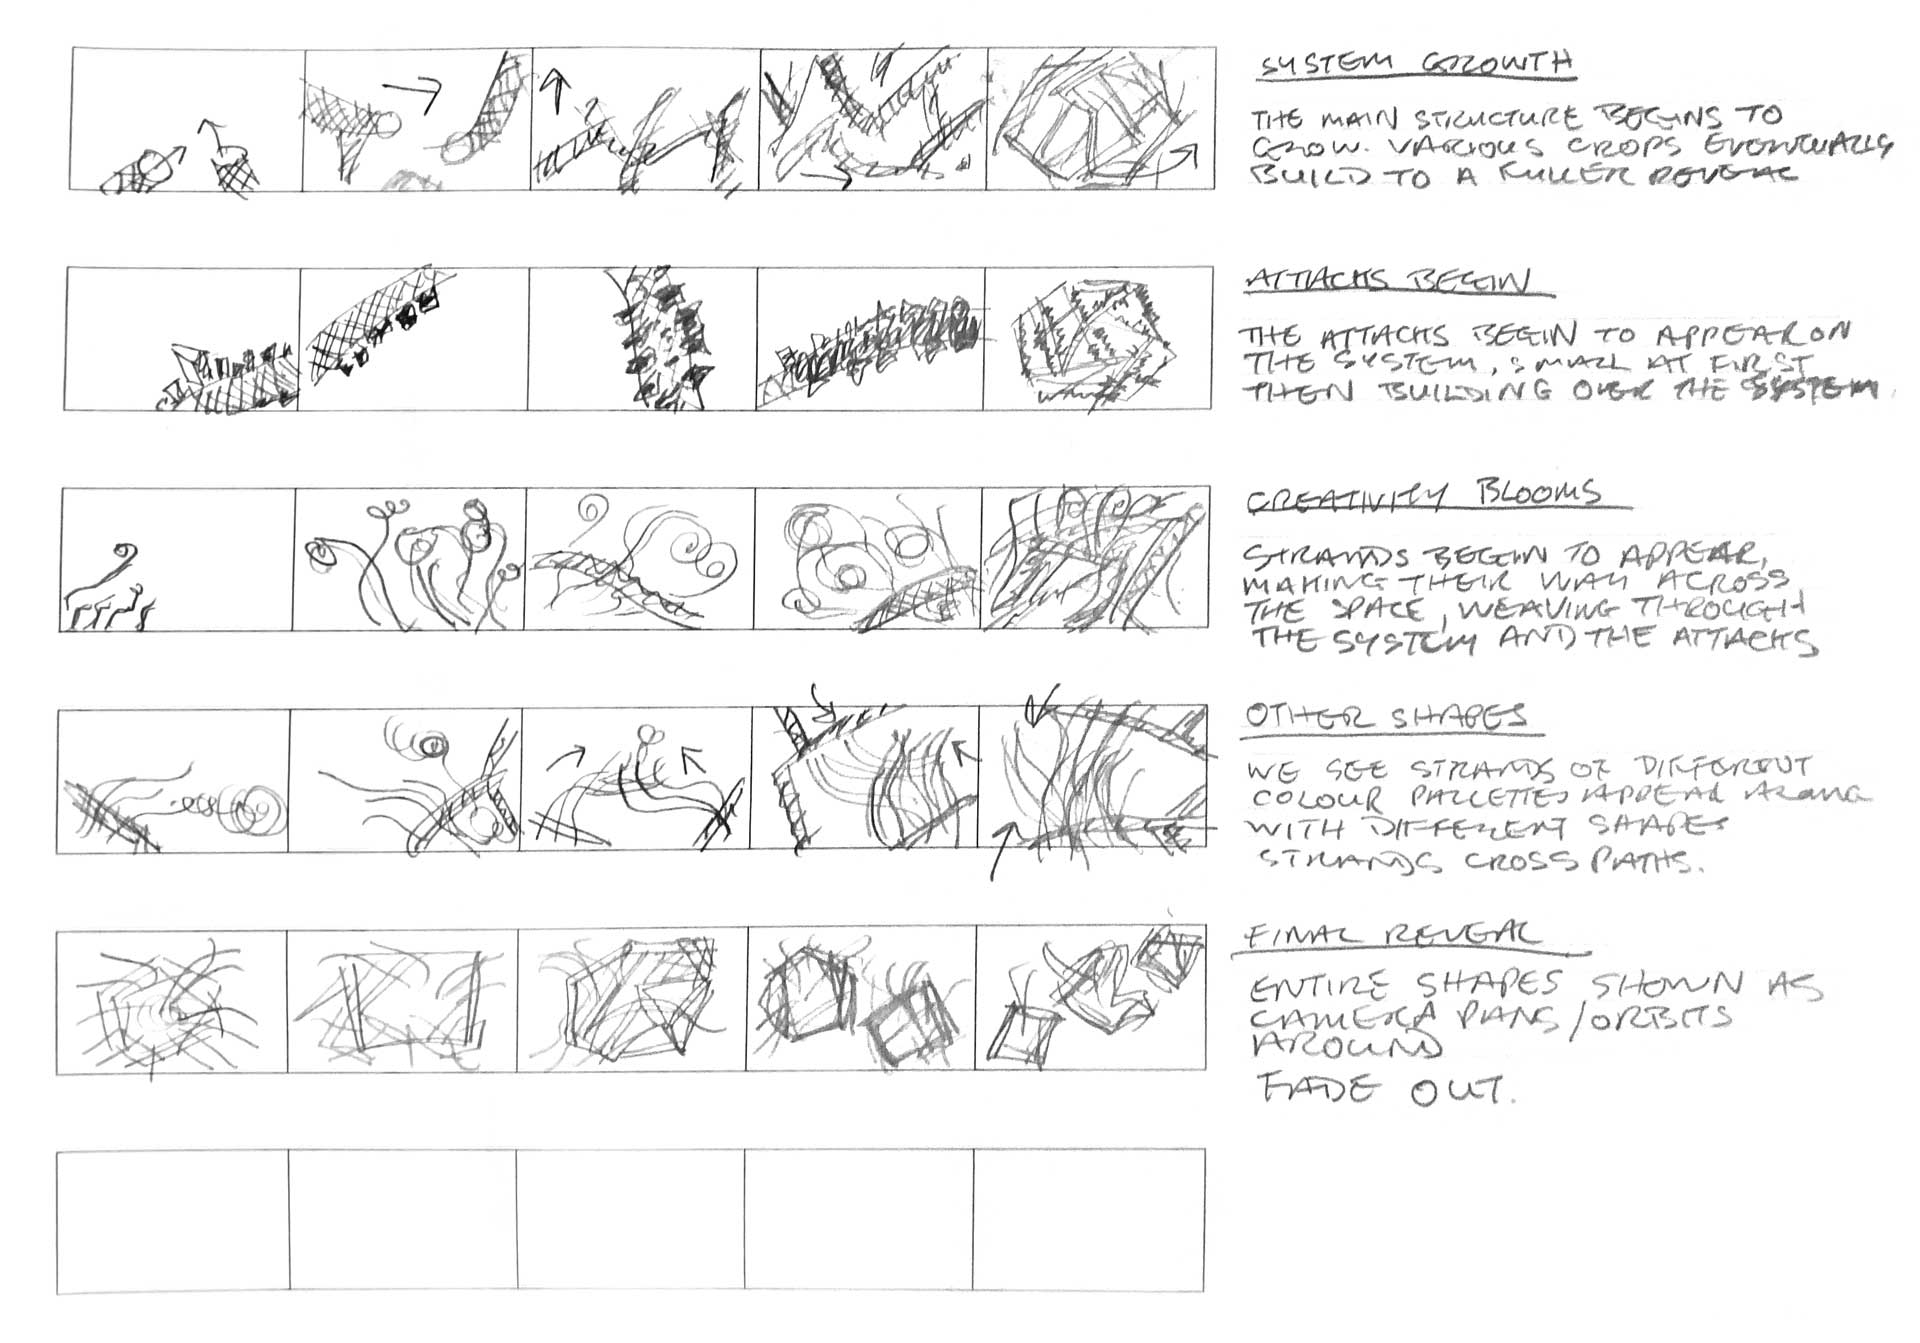 Scoping out a storyboard